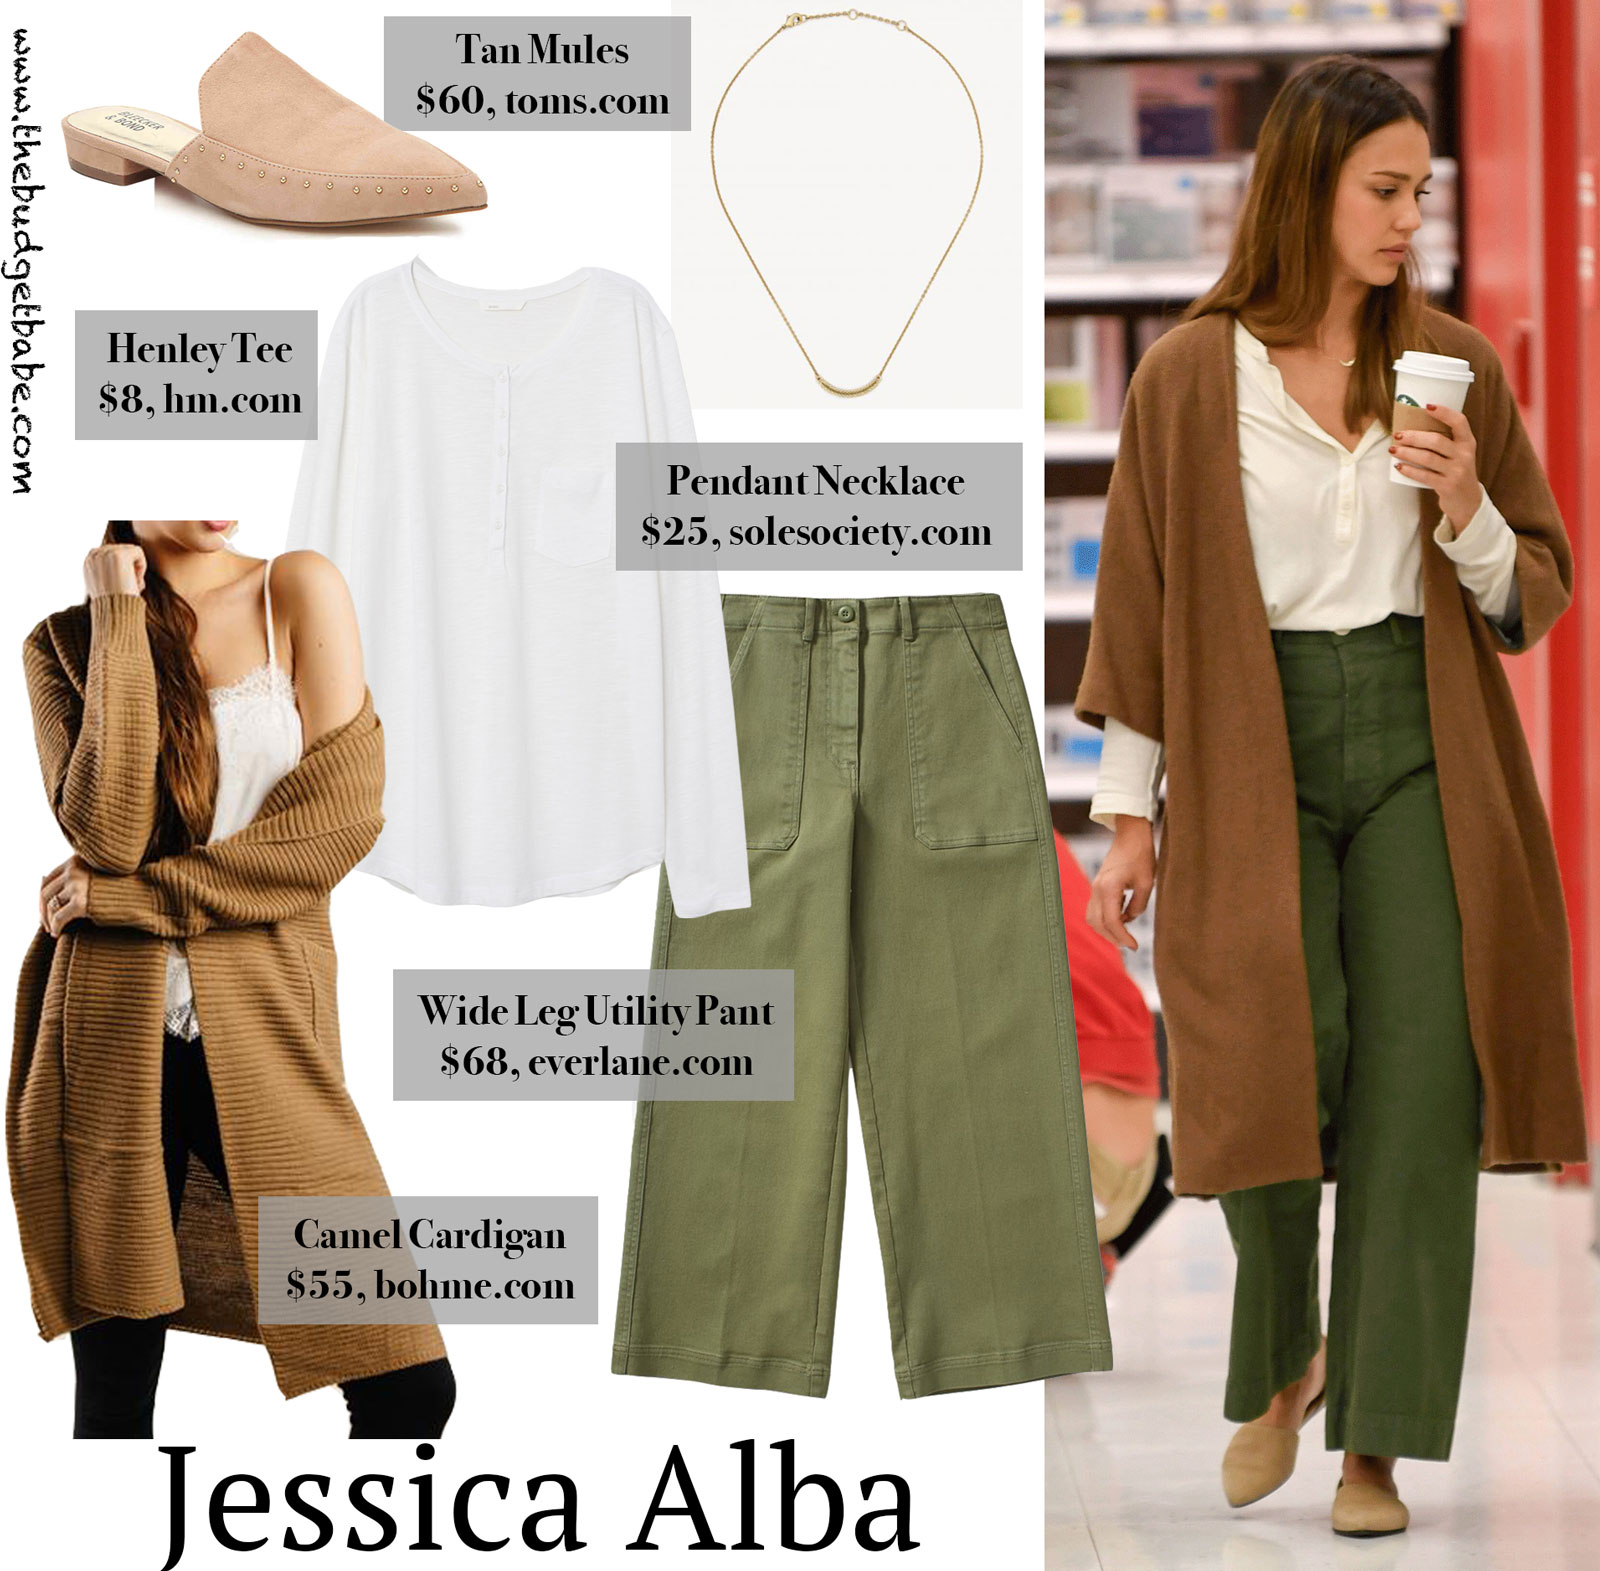 Jessica Alba Green Pants and Camel Cardigan Look for Less